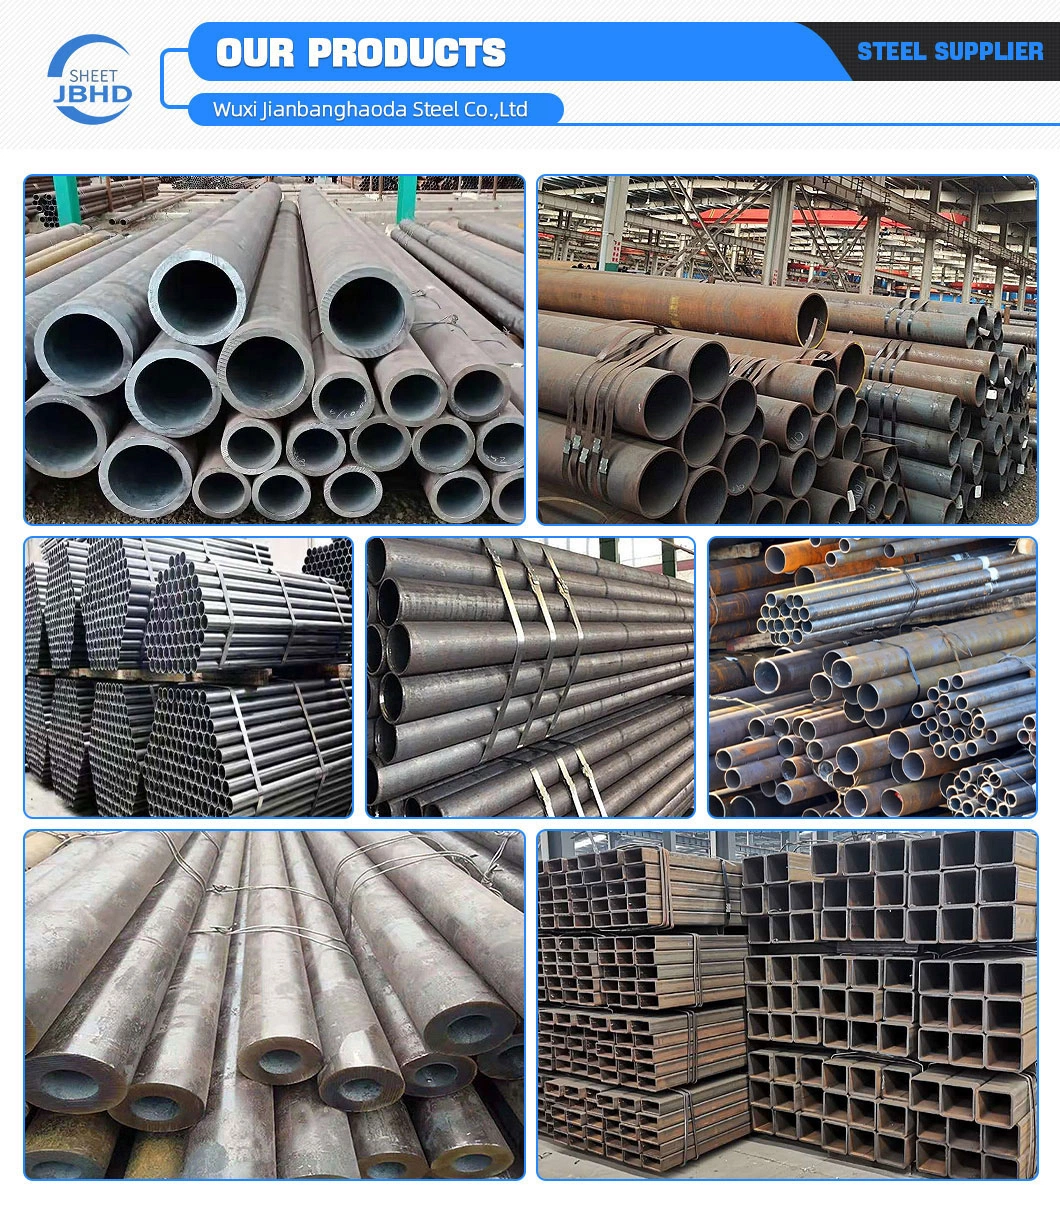 Large Diameter Thick Wall Straight Seam Steel Pipe 20# Q235A Q235B Q345b 16mn 20 Q345 L245 L290 X42 X46 X70 X80 0cr13 Welded Coil Thick Wall Coil